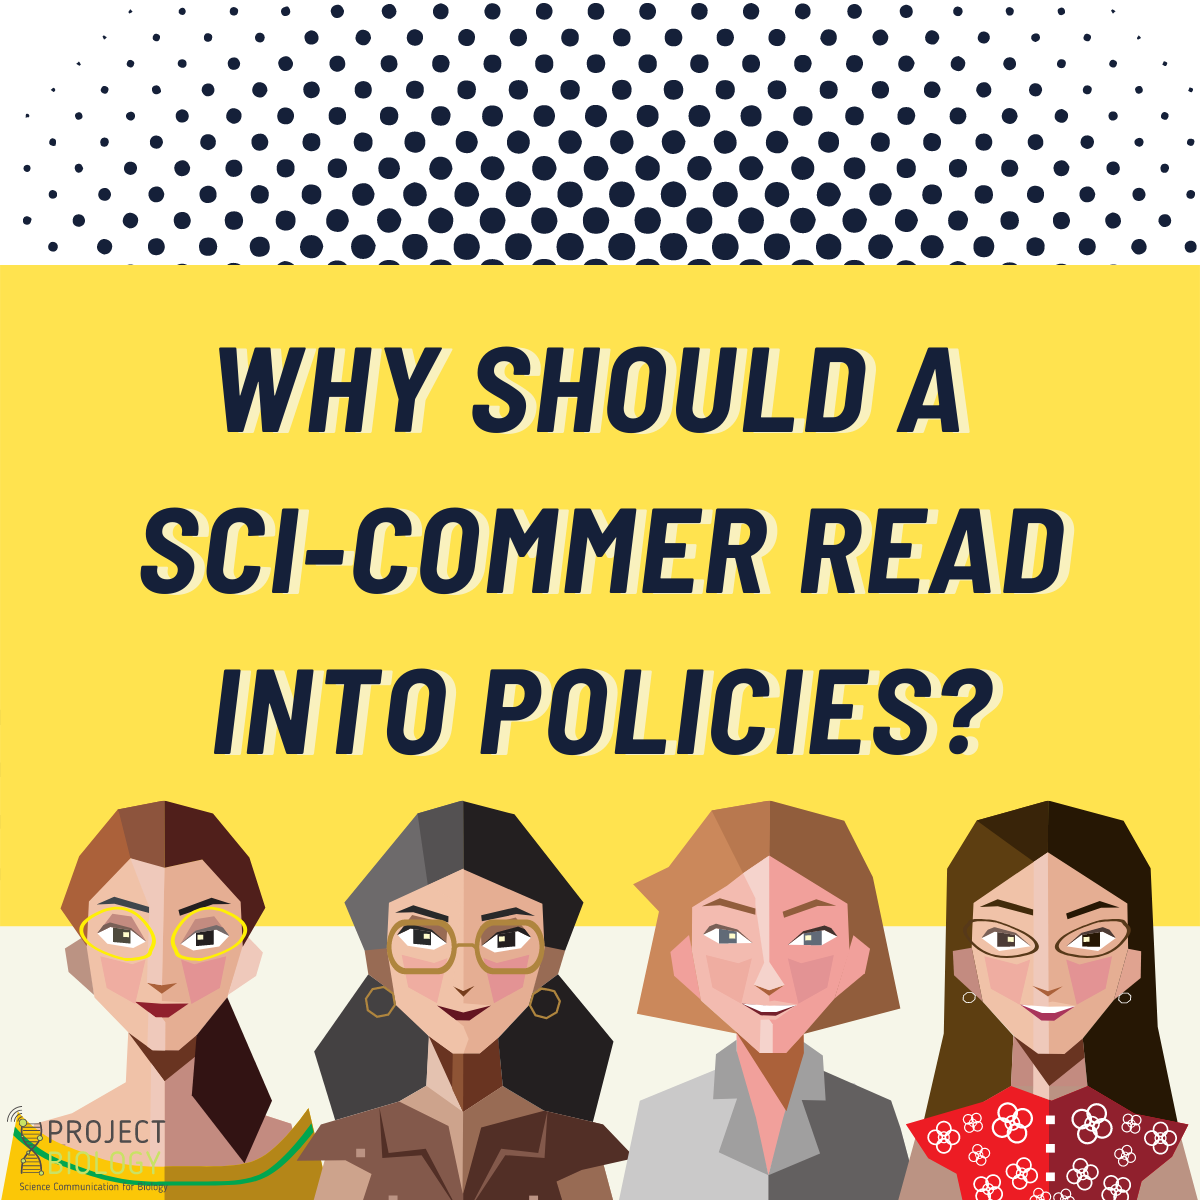 Science communication, women’s health, and policy structures